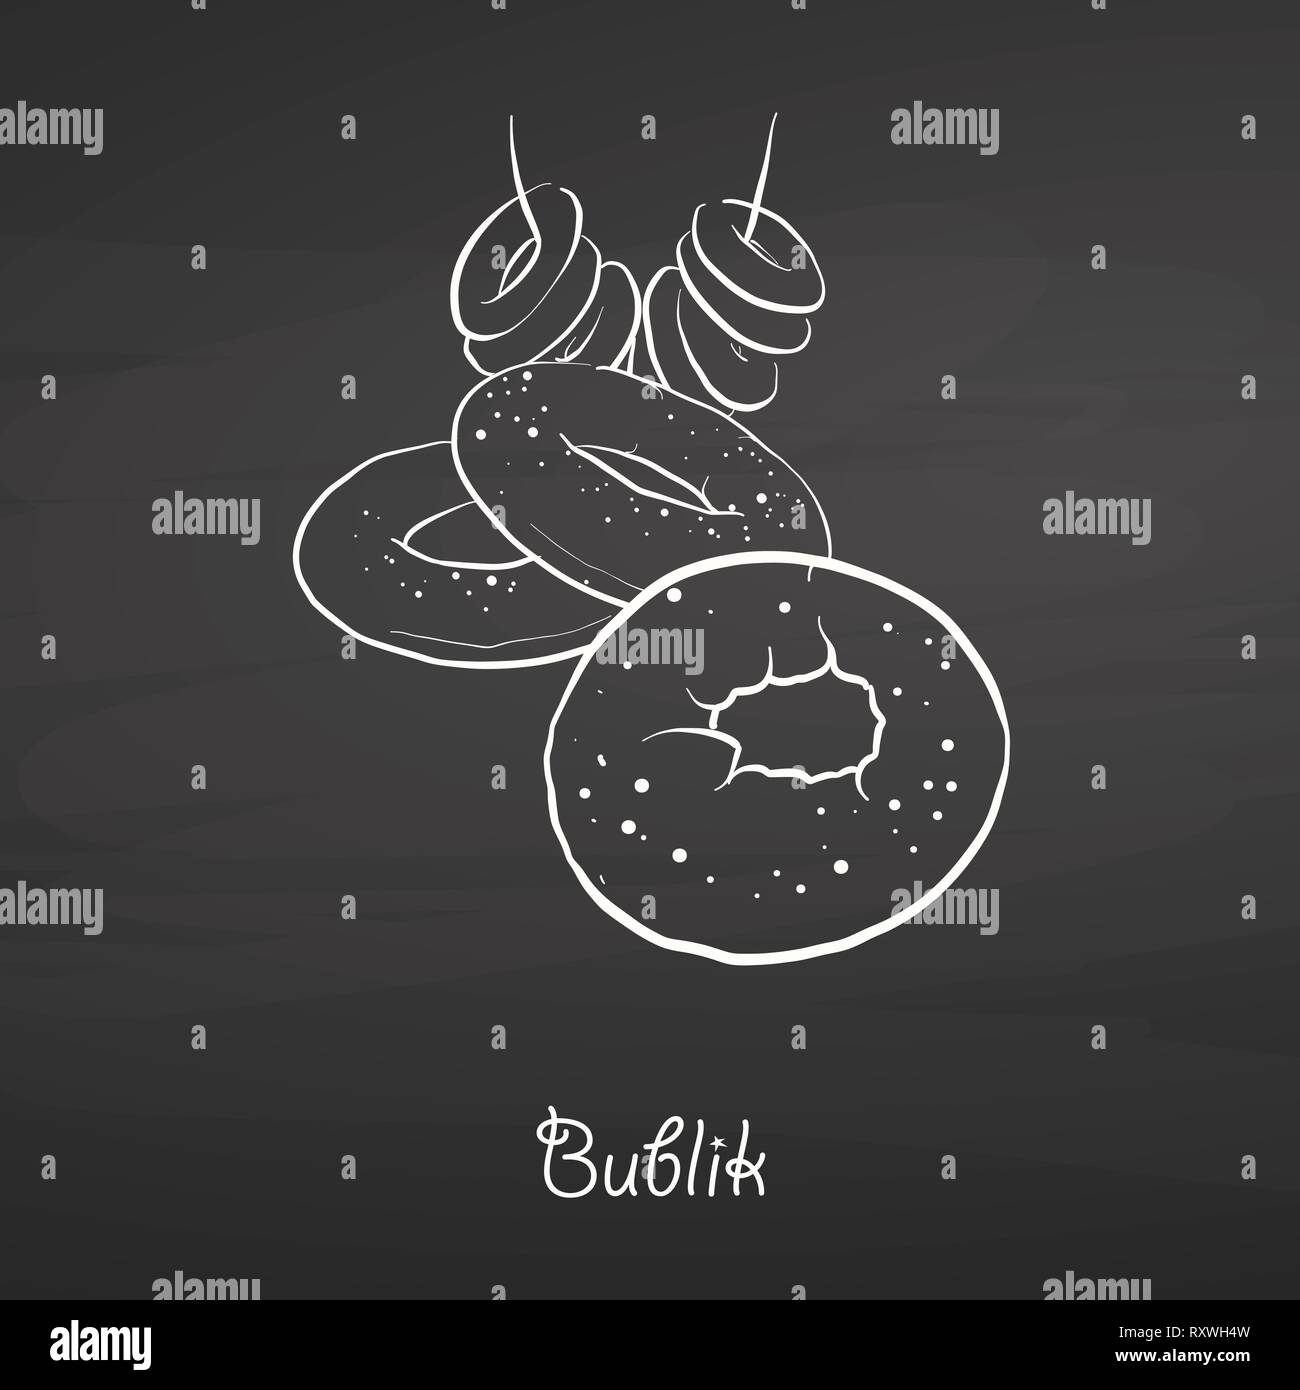 Bublik food sketch on chalkboard. Vector drawing of Wheat bread, usually known in Poland. Food illustration series. Stock Vector